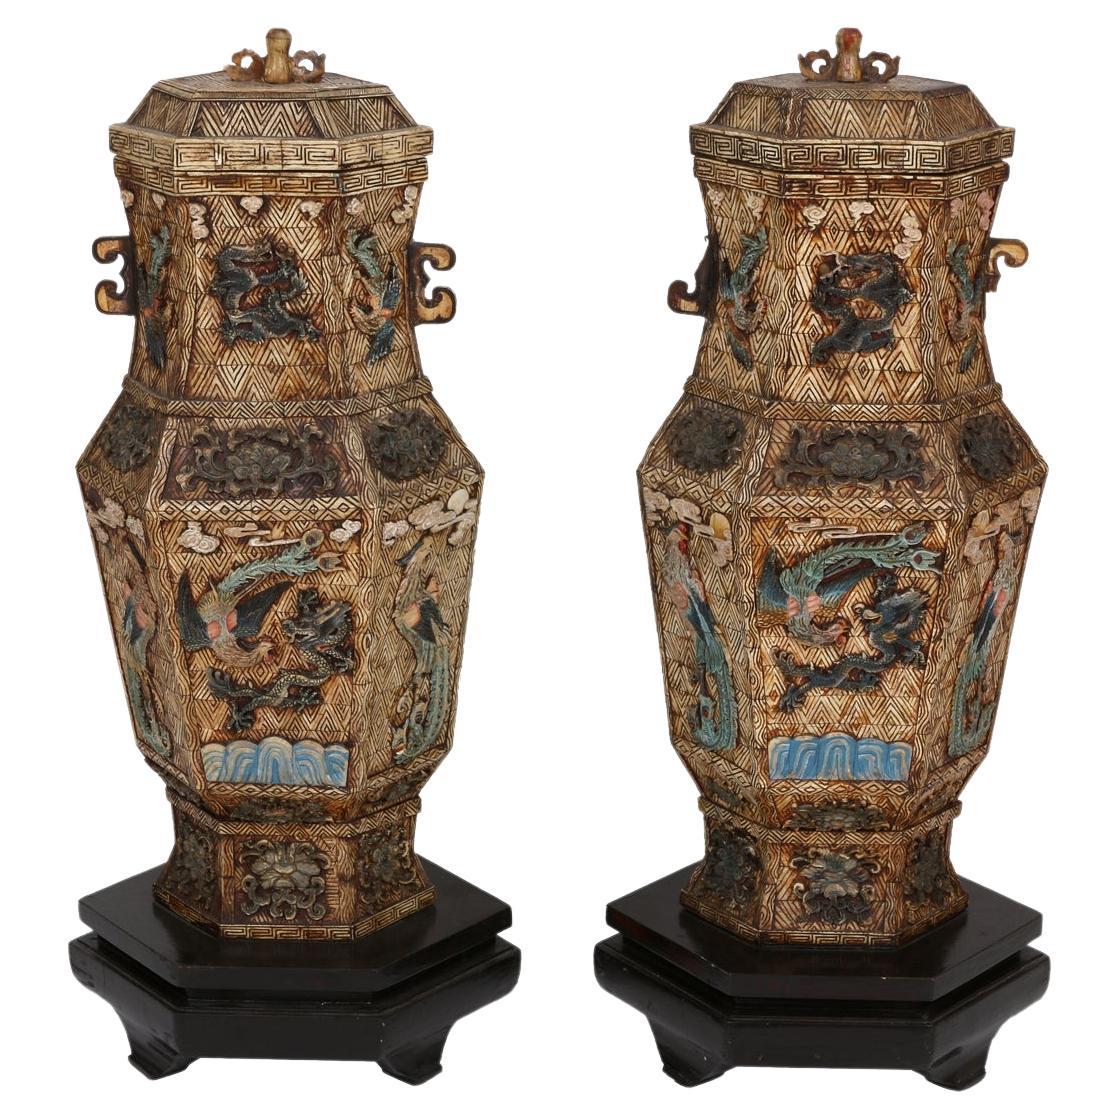 Pair of Vintage Asian Carved Hard Stone Urns on Stands with Intricate Detail